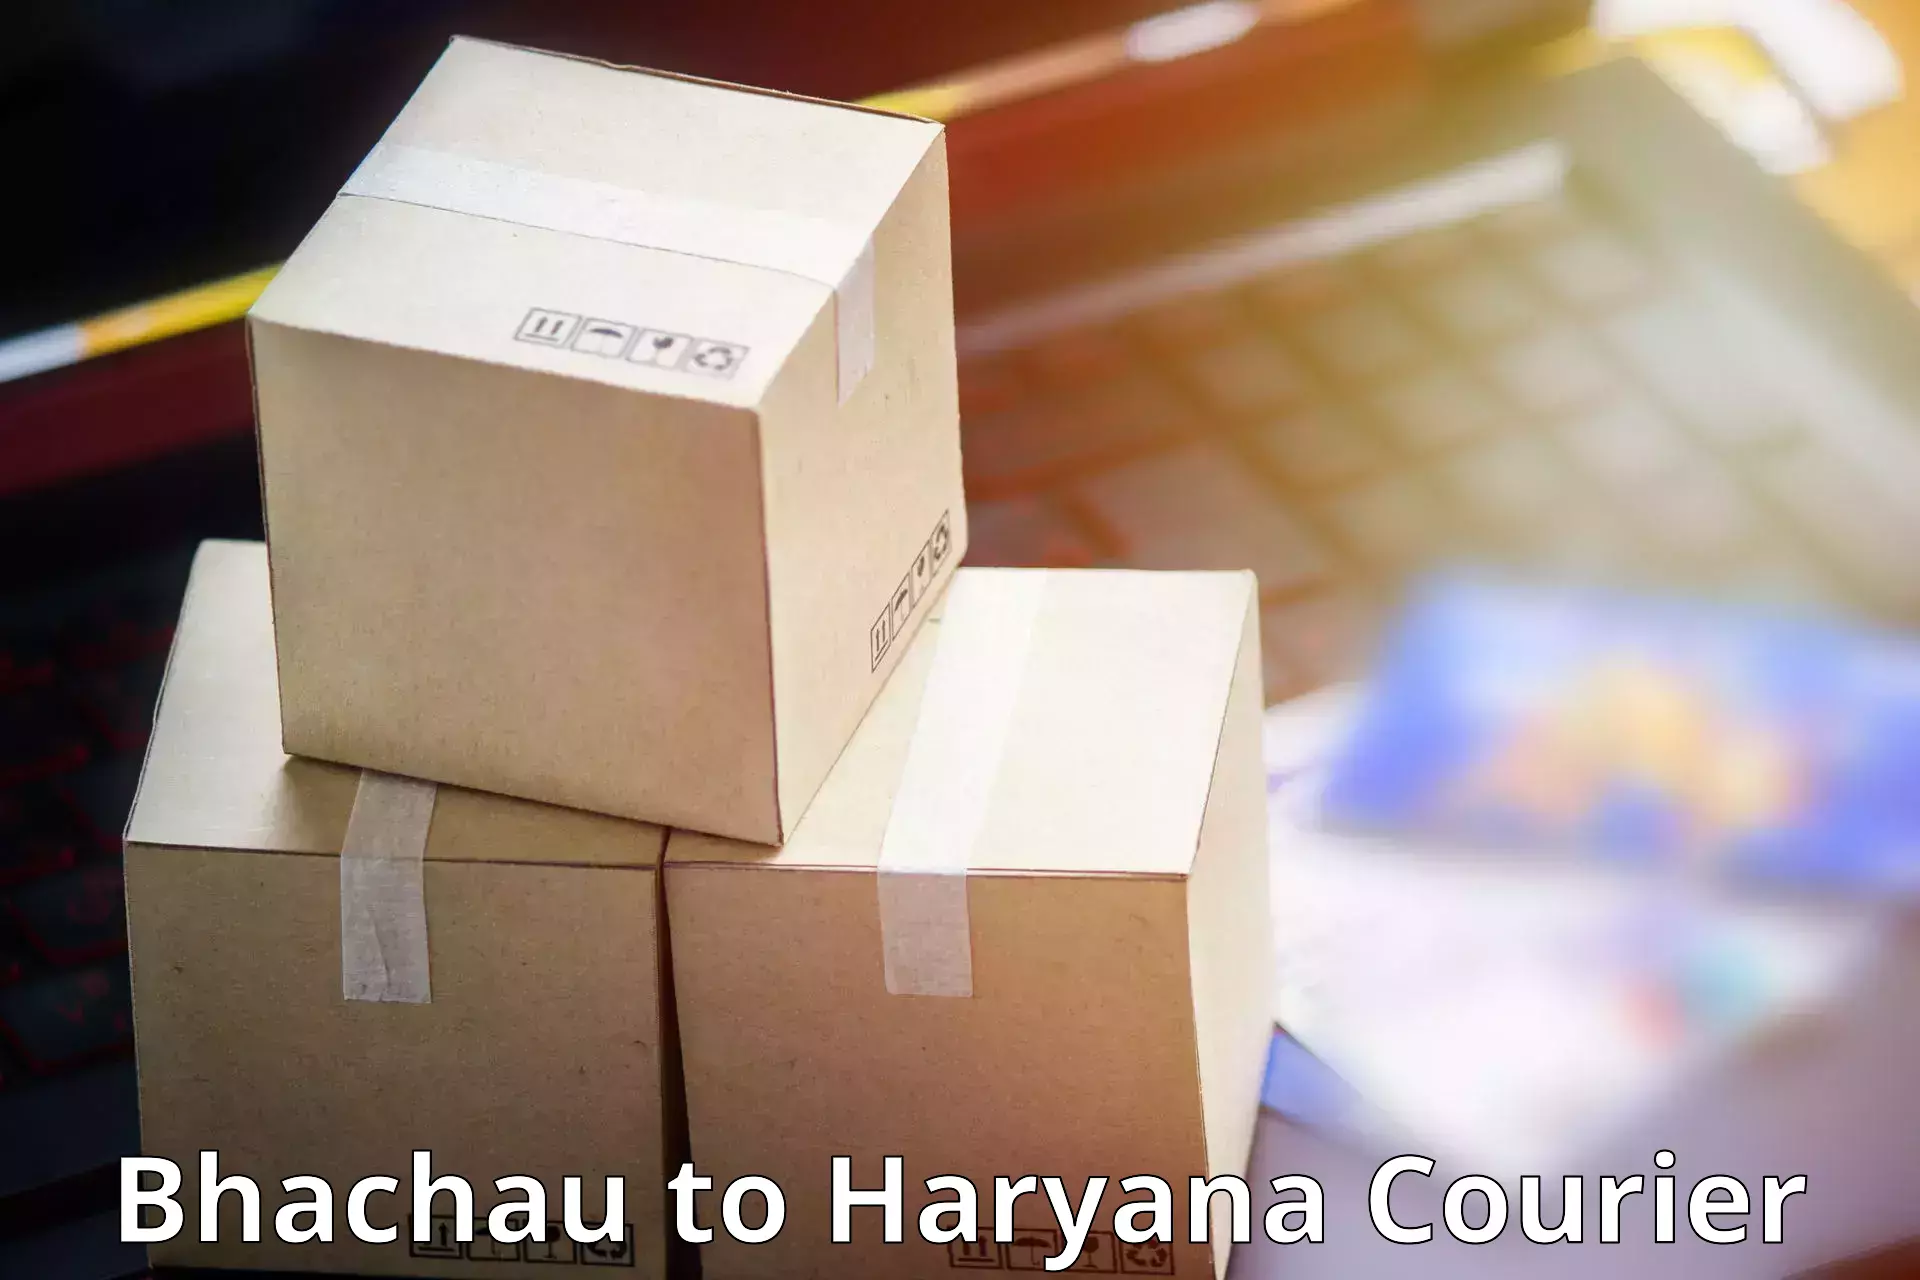 Subscription-based courier Bhachau to Hansi